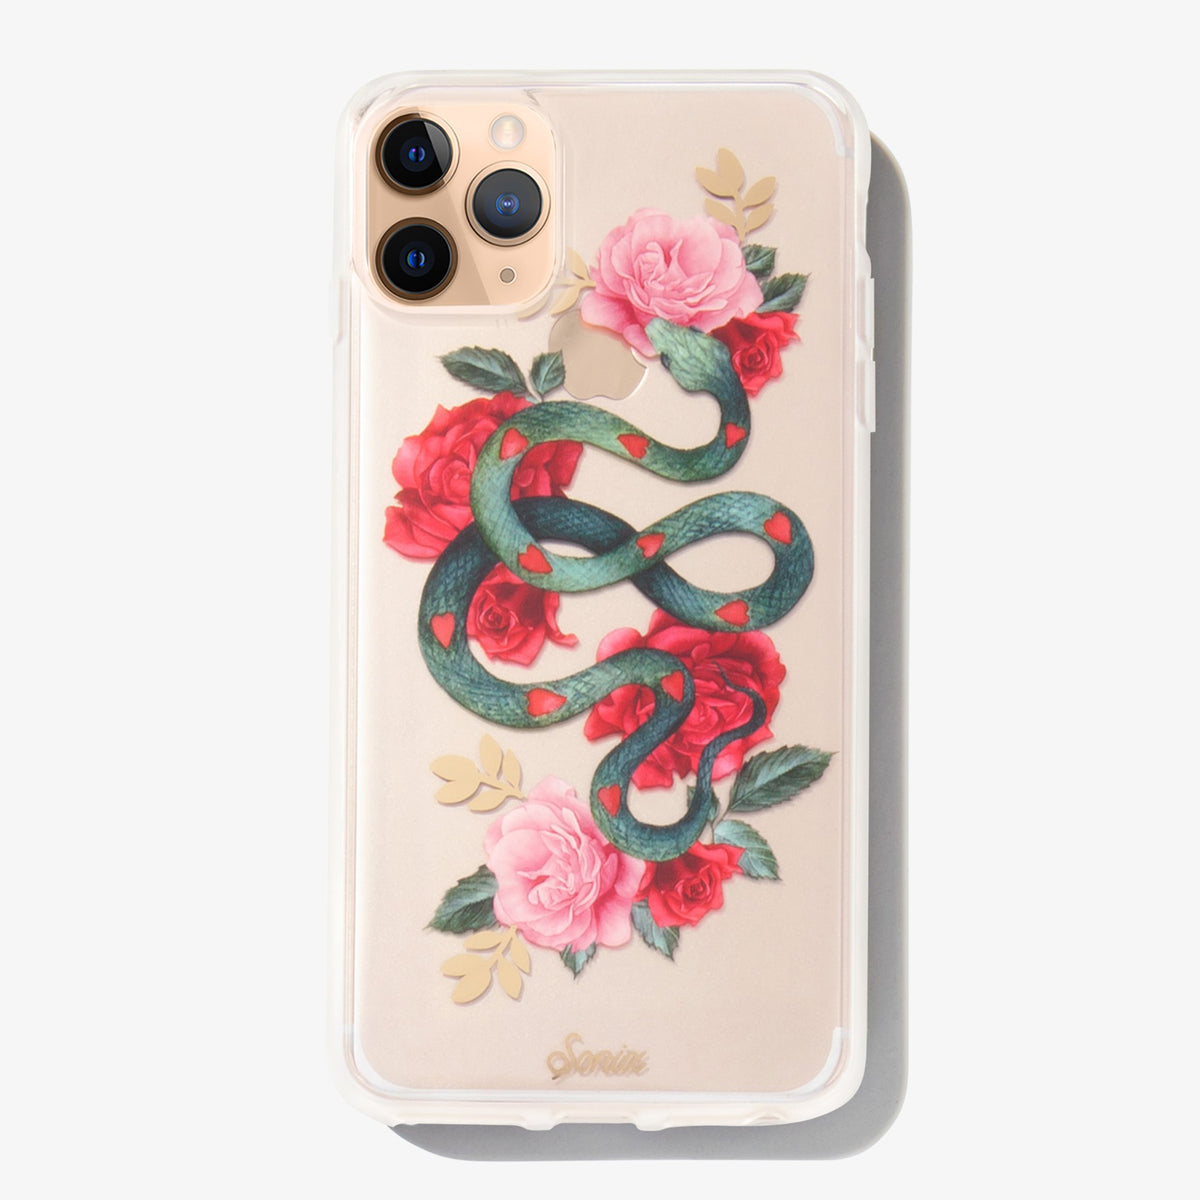 Gucci Snake iPhone 11, iPhone 11 Pro